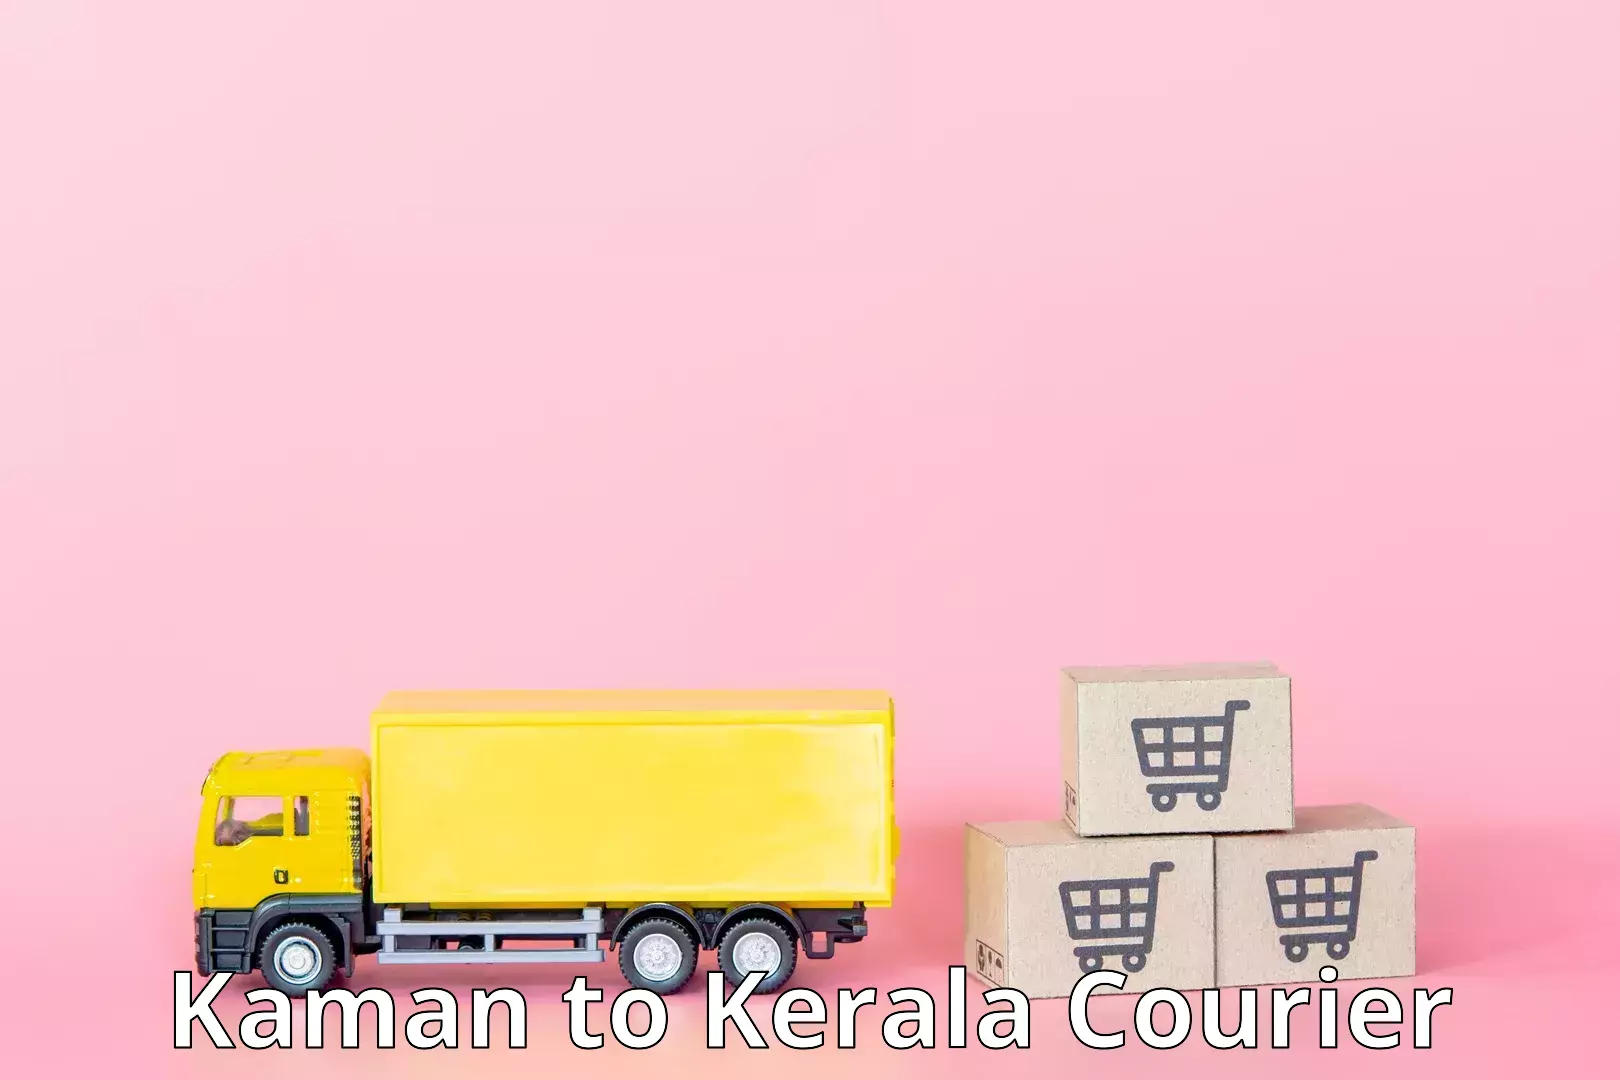 Next-day delivery options in Kaman to Kerala